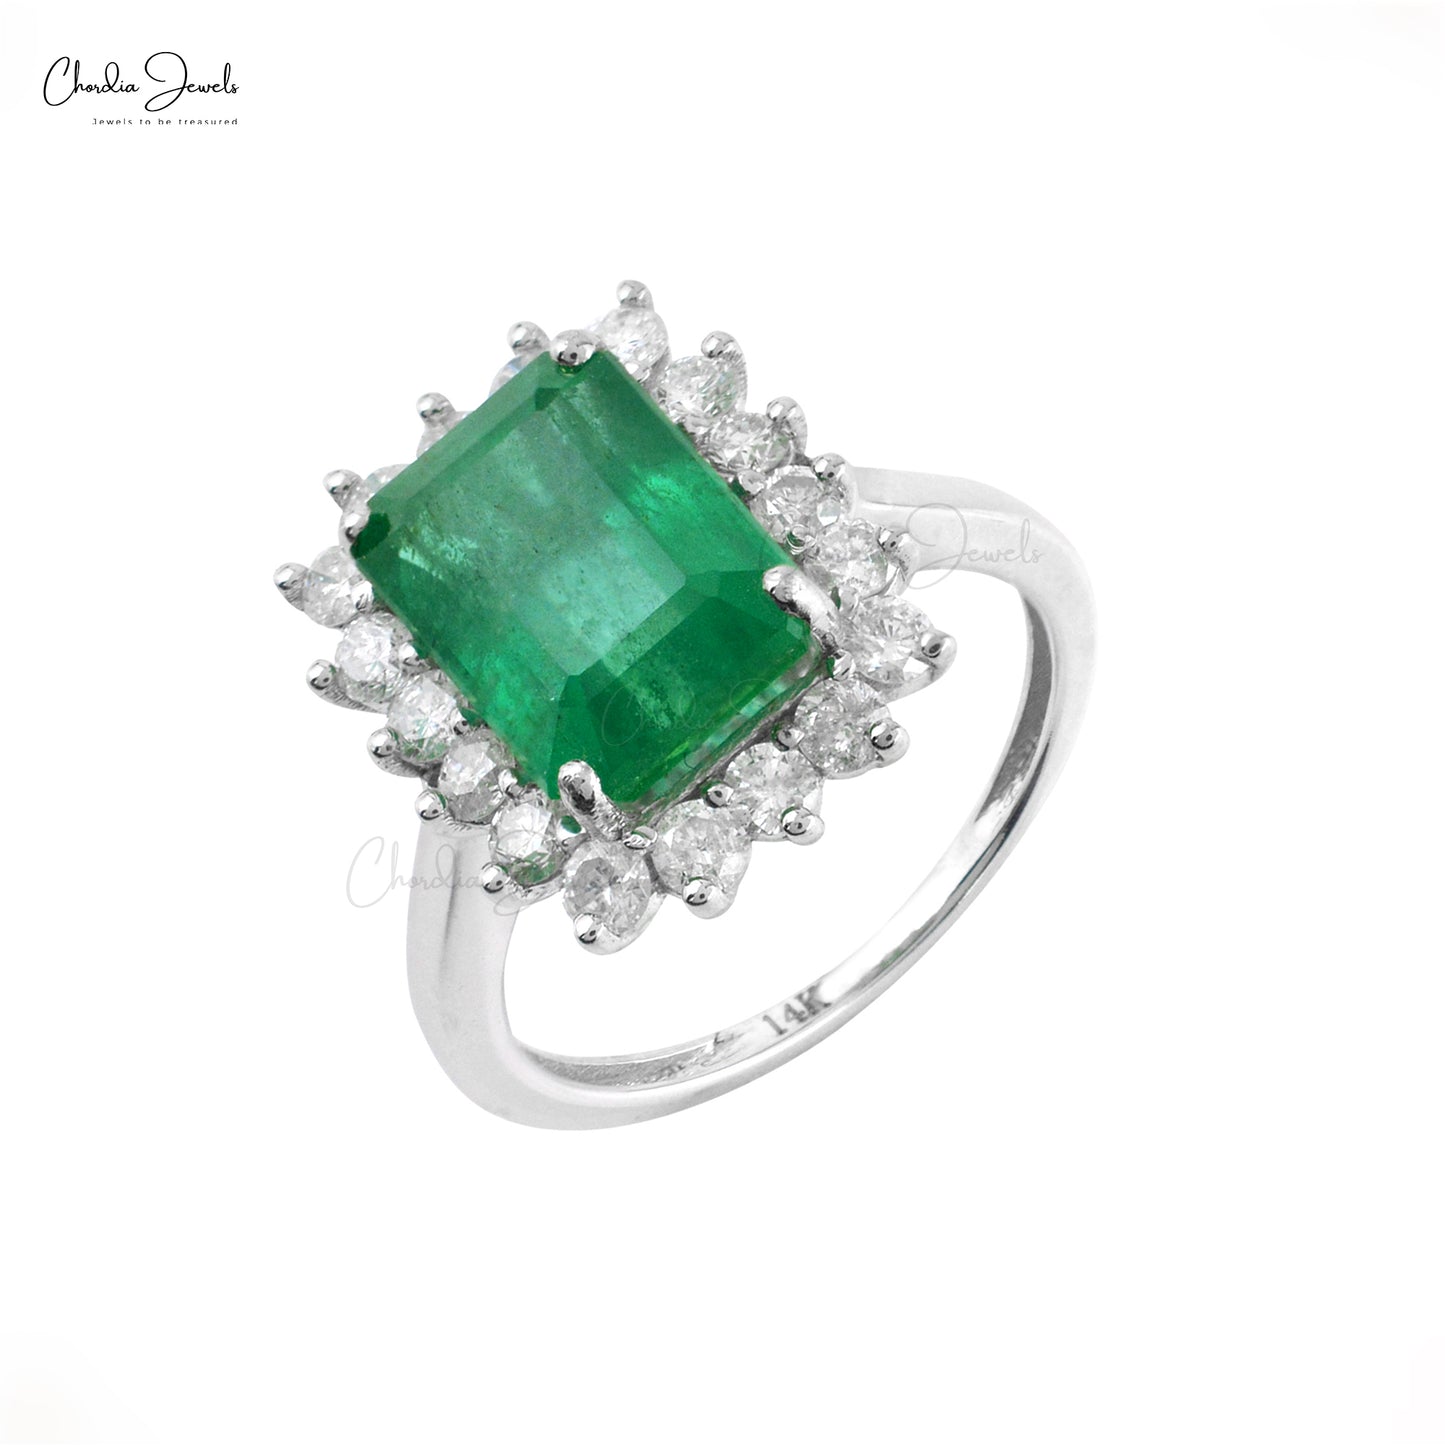 White Diamond Natural Emerald Ring 14k Solid white Gold Halo Ring 12x9mm Emerald Cut Gemstone Ring For Engagement